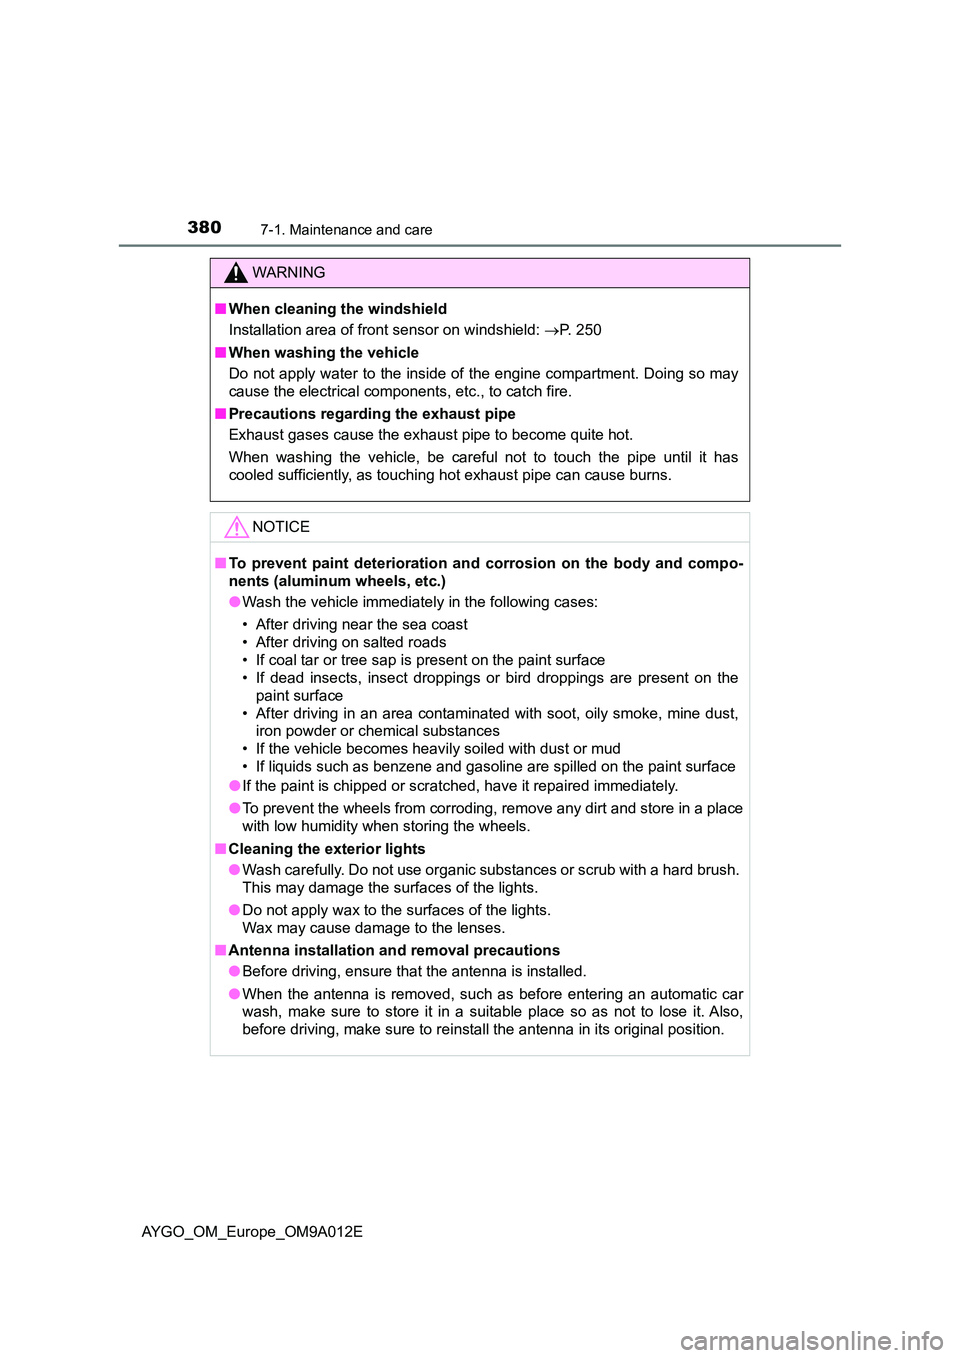 TOYOTA AYGO 2021  Owners Manual 3807-1. Maintenance and care
AYGO_OM_Europe_OM9A012E
WARNING
■When cleaning the windshield 
Installation area of front sensor on windshield:  P. 250 
■ When washing the vehicle 
Do not apply wa